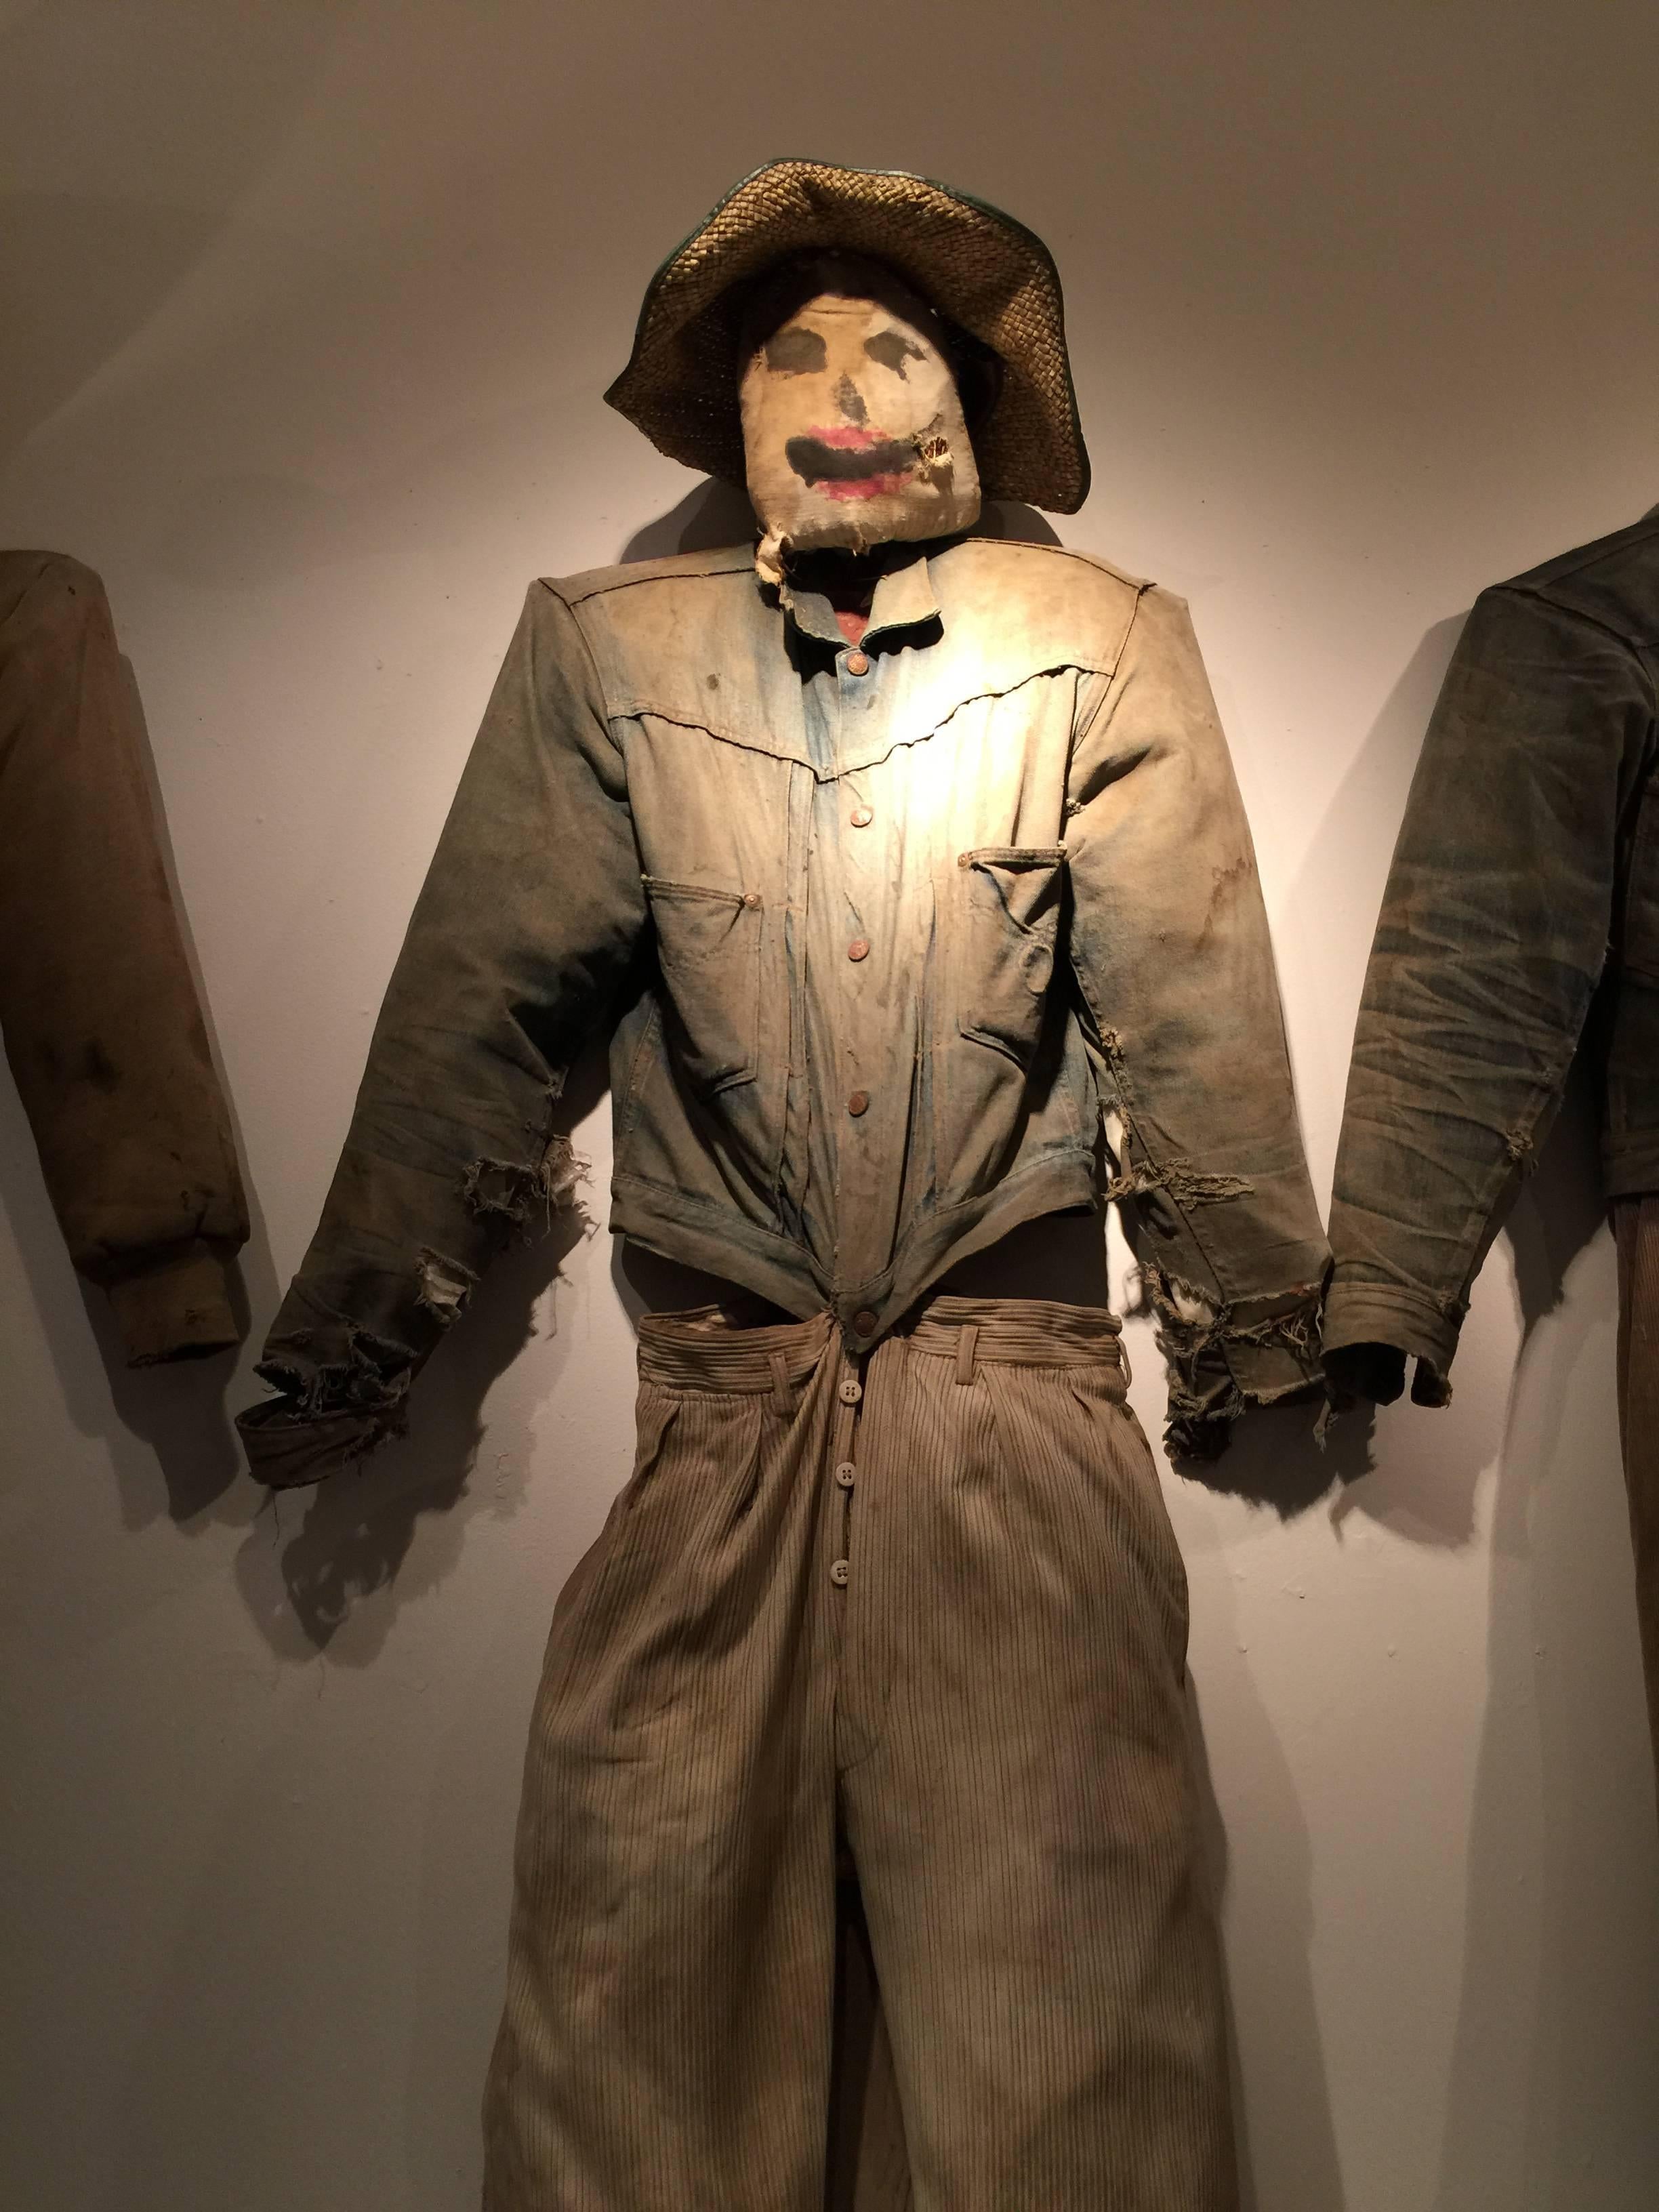 This vintage scarecrow came out of a barn in Vermont. I'm not sure of the age but the clothing suggests the 1940s. He's been restuffed with plastic sheeting at some point in his life.